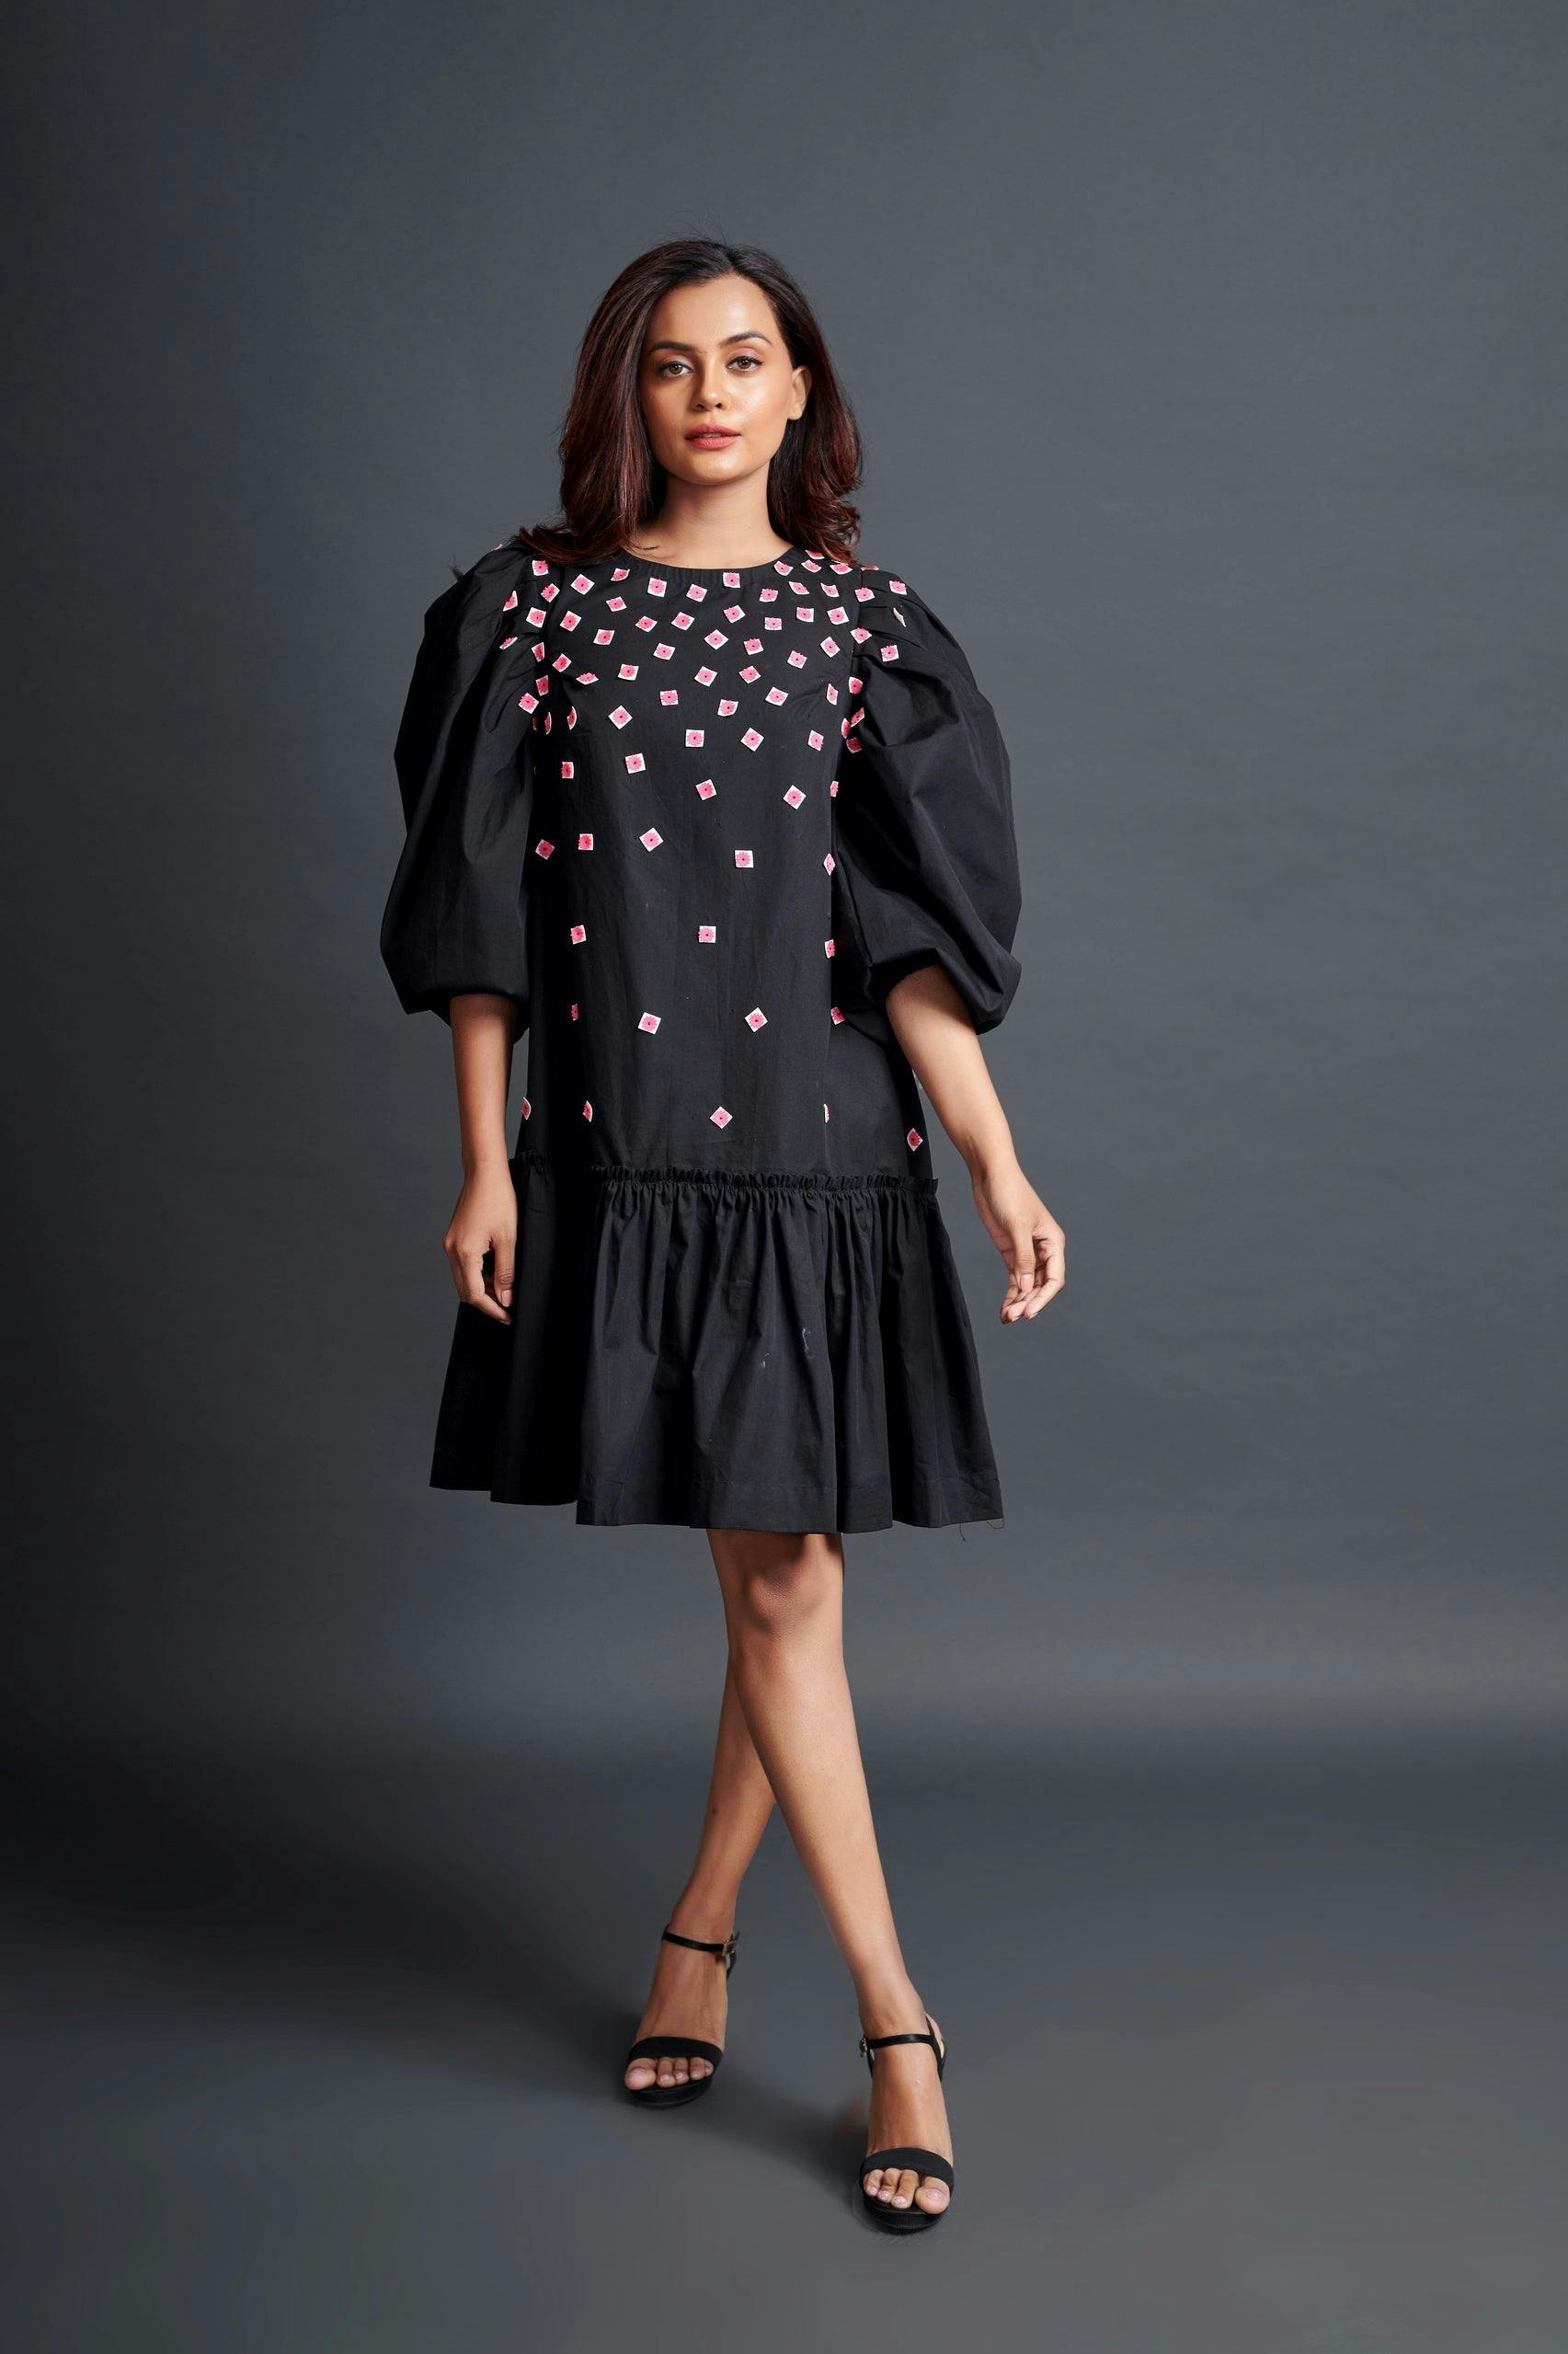 WF-1102-BLACK ::: Black Short Backless Dress With Embroidery, a product by Deepika Arora